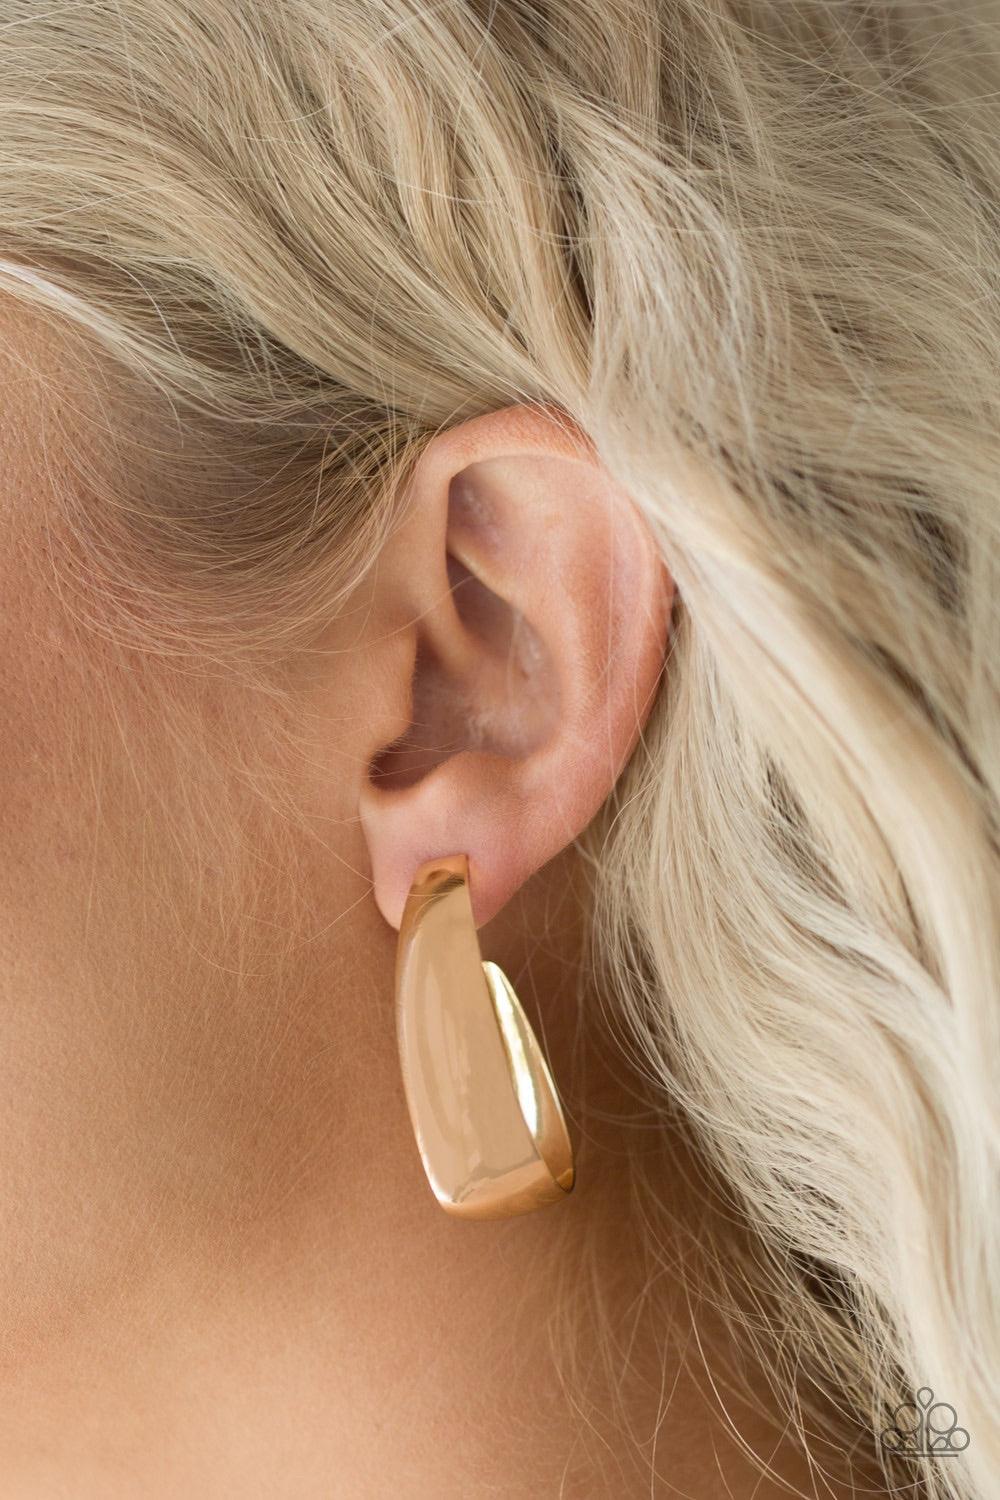 Paparazzi Accessories Gypsy Belle - Gold Brushed in a high-sheen finish, a glistening gold frame sharply curls beneath the ear for a casual look. Earring attaches to a standard post fitting. Hoop measures 1" in diameter. Jewelry